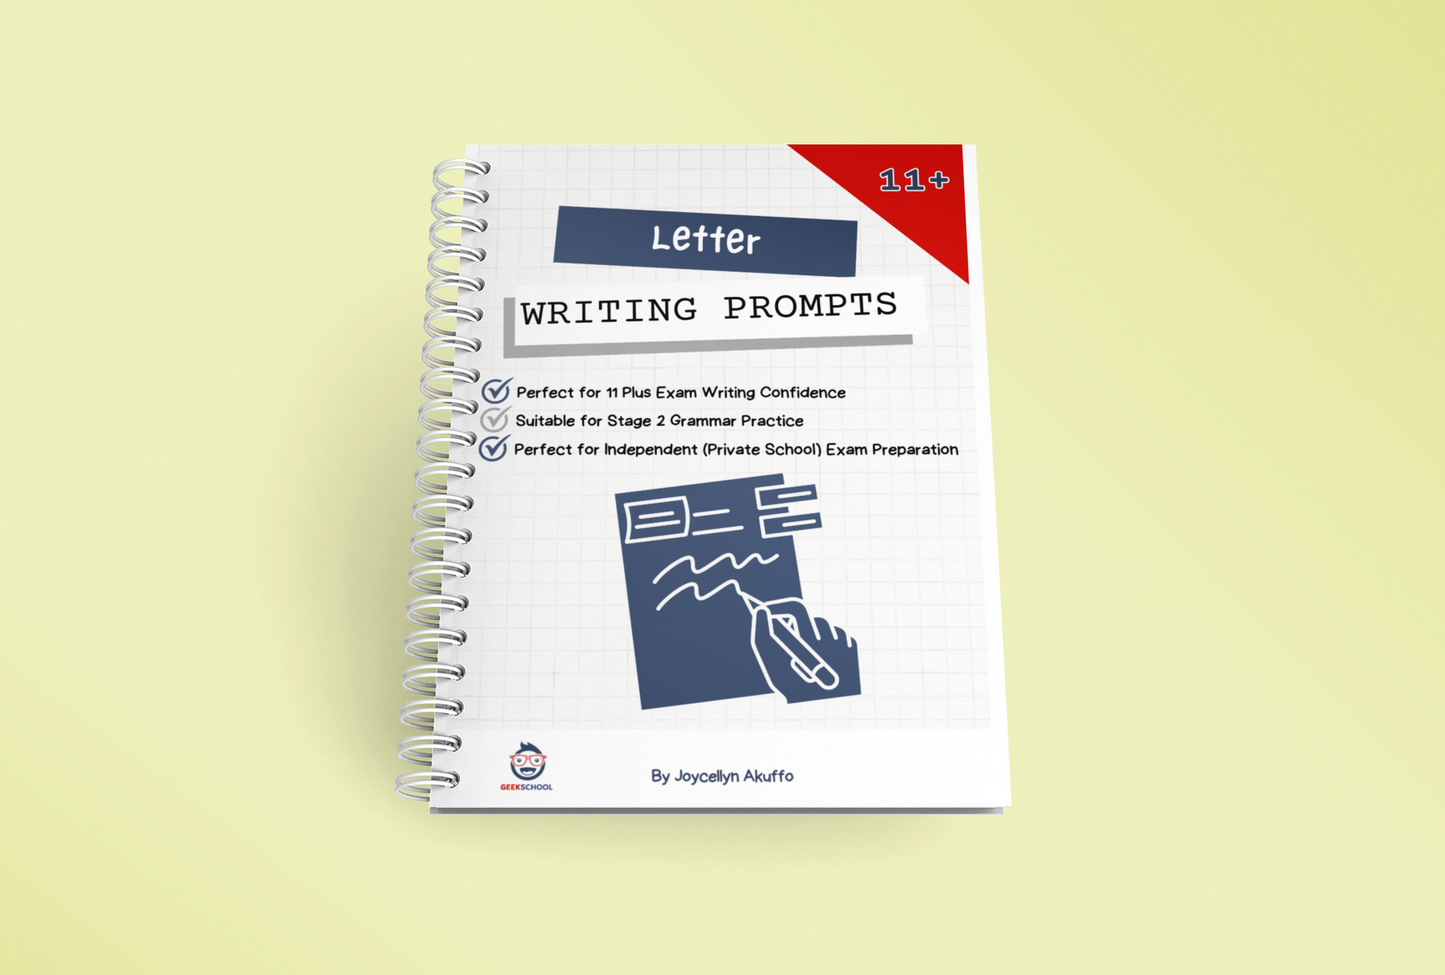 11 Plus Letter Writing Prompts Booklet - 50 Writing Tasks